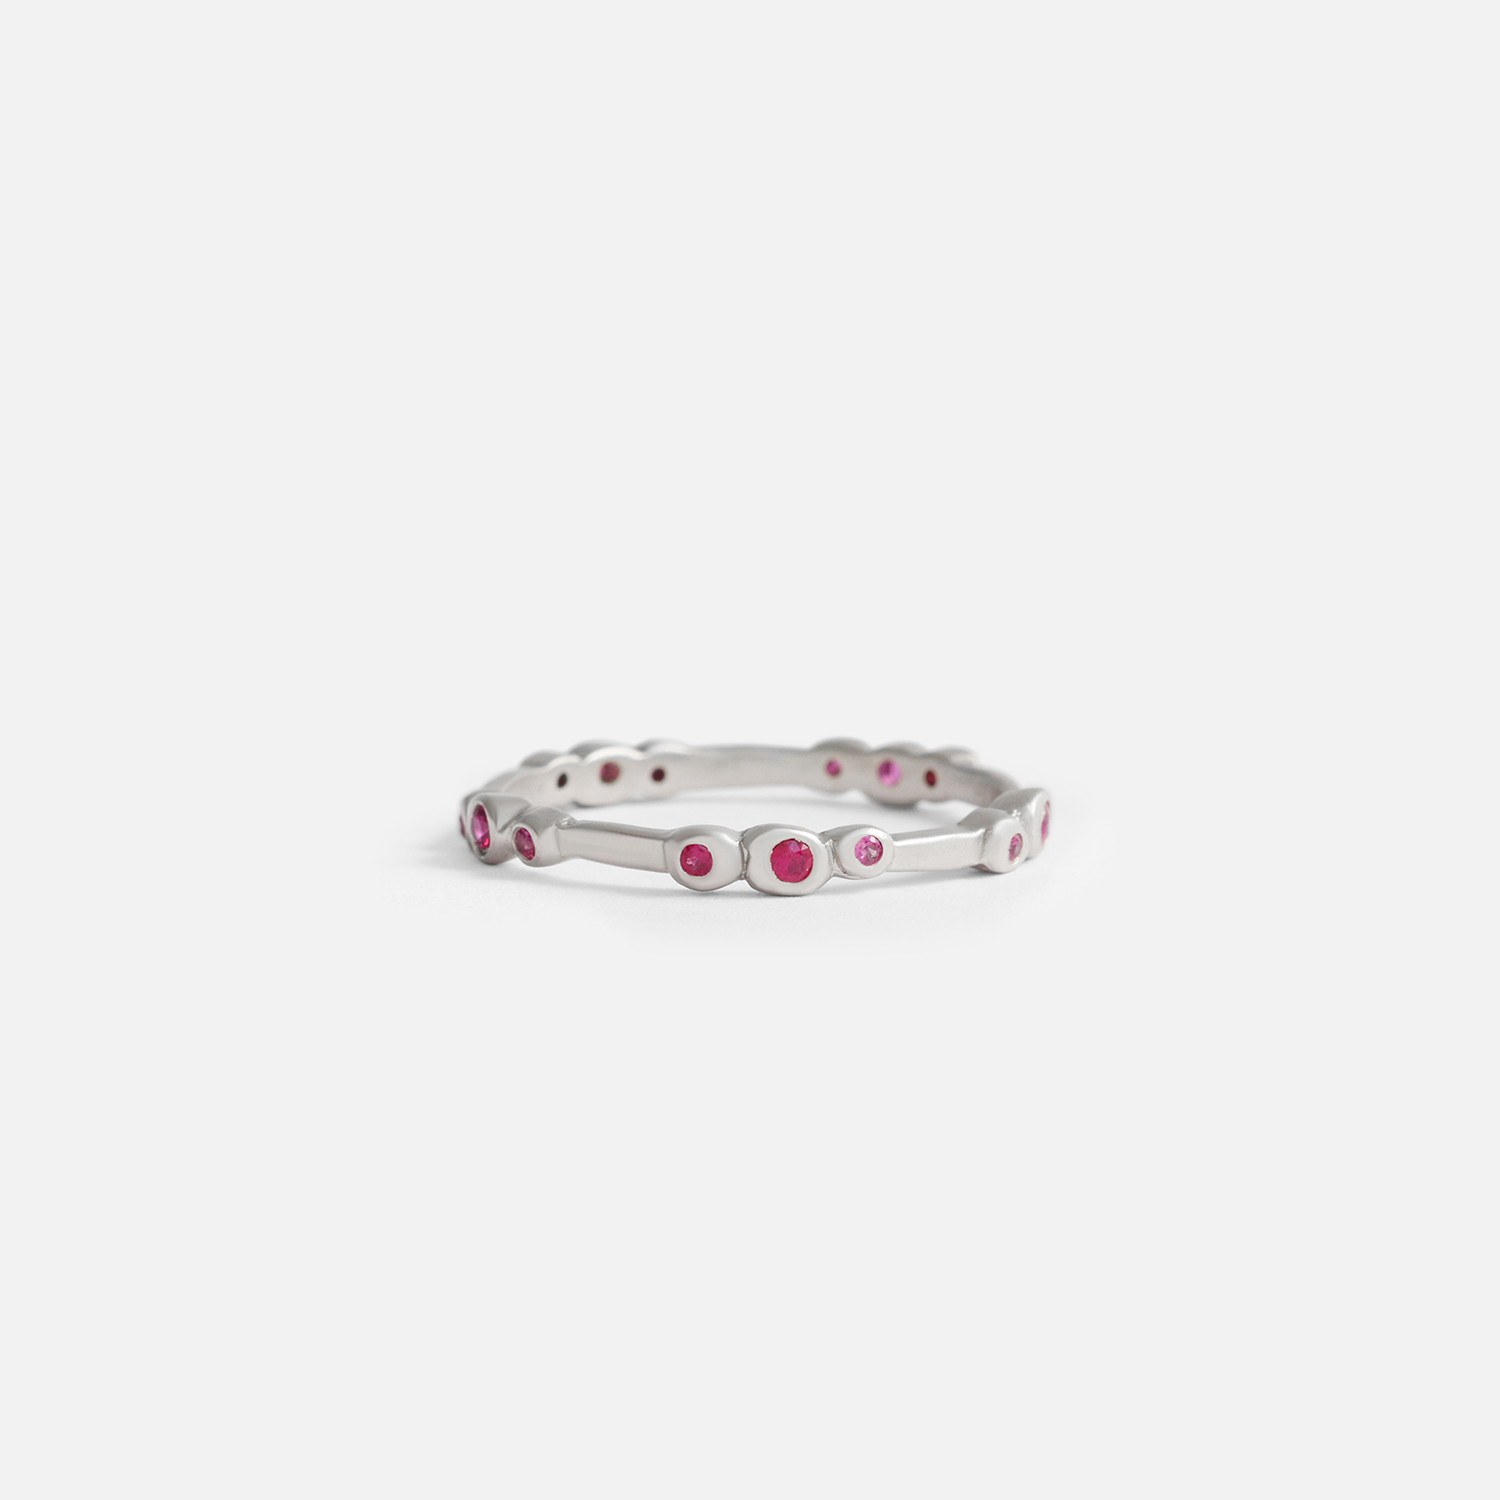 Bubble 12 / Ruby Ring By Hiroyo in rings Category